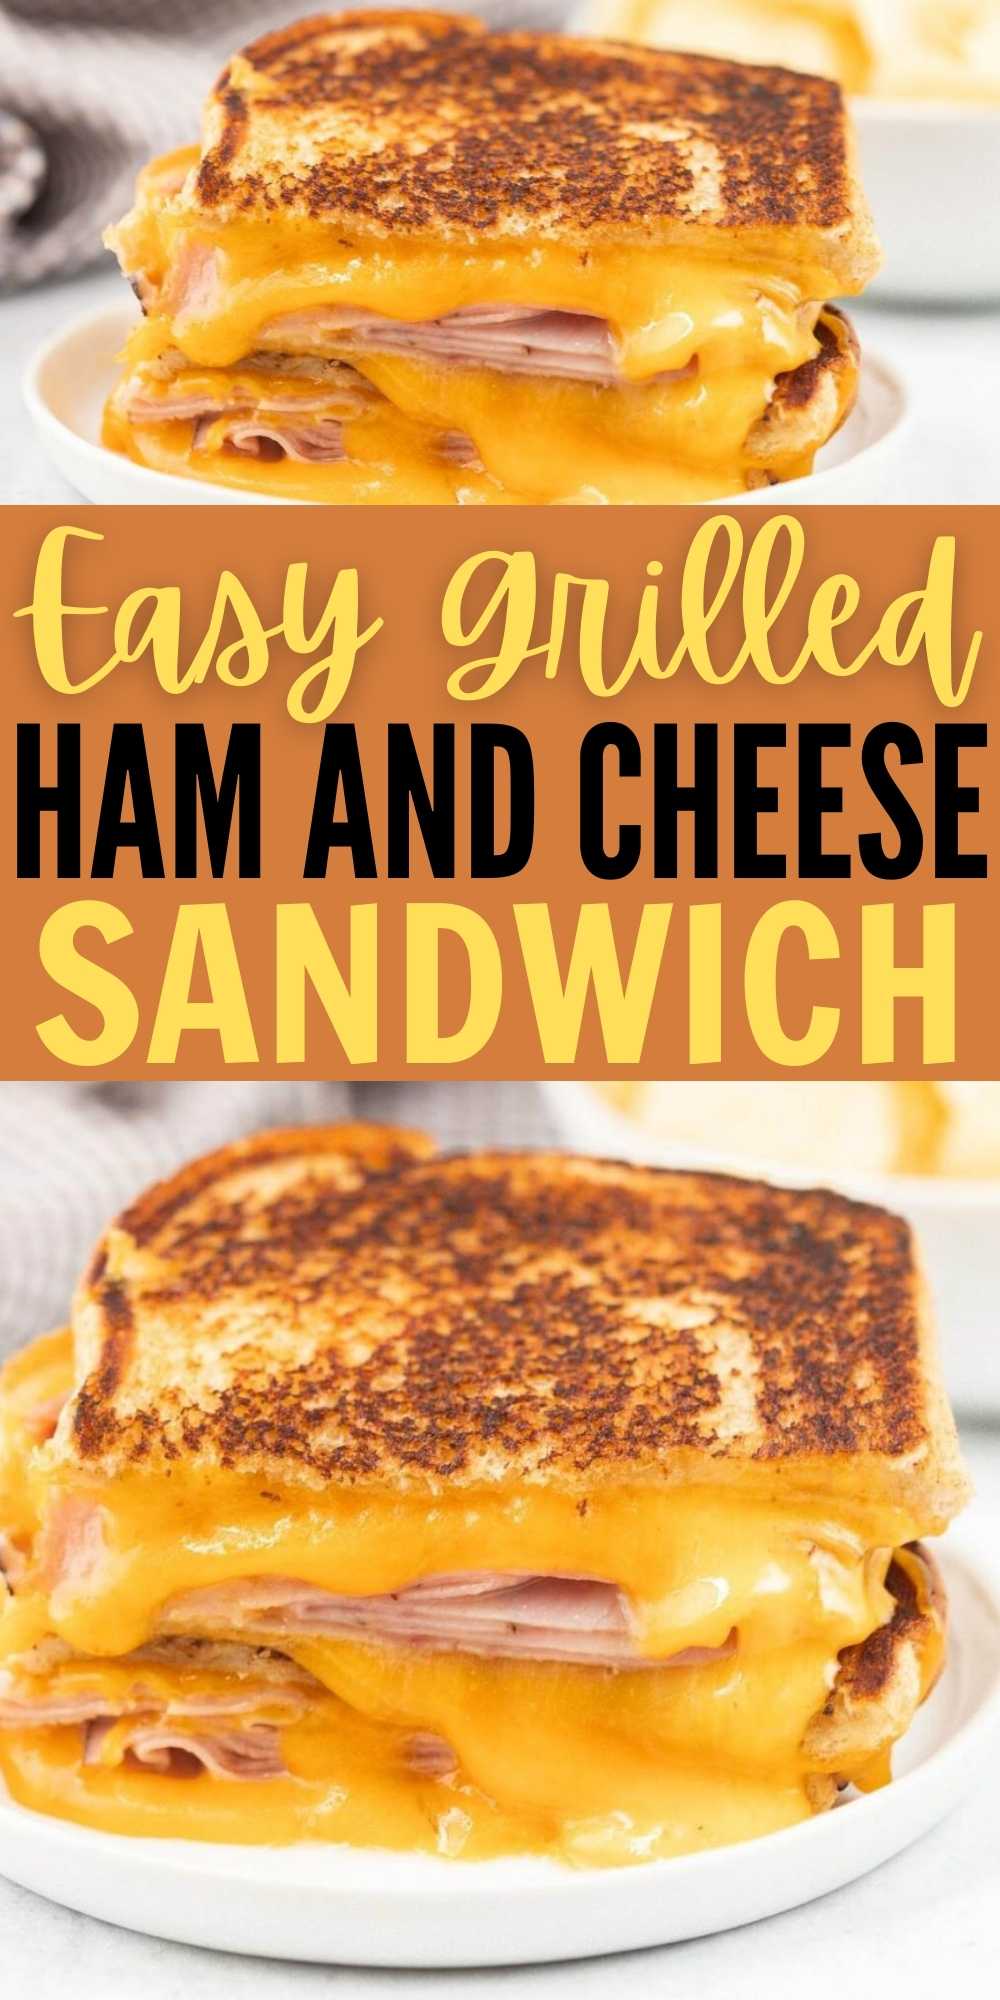 This Grilled Ham and Cheese Sandwich is ready in less than 10 minutes. The buttered bread with melted cheese and ham toasted to perfection is the best comfort food. A classic sandwich but still one of my family's favorite. #eatingonadime #hamandcheese #grilledsandwich